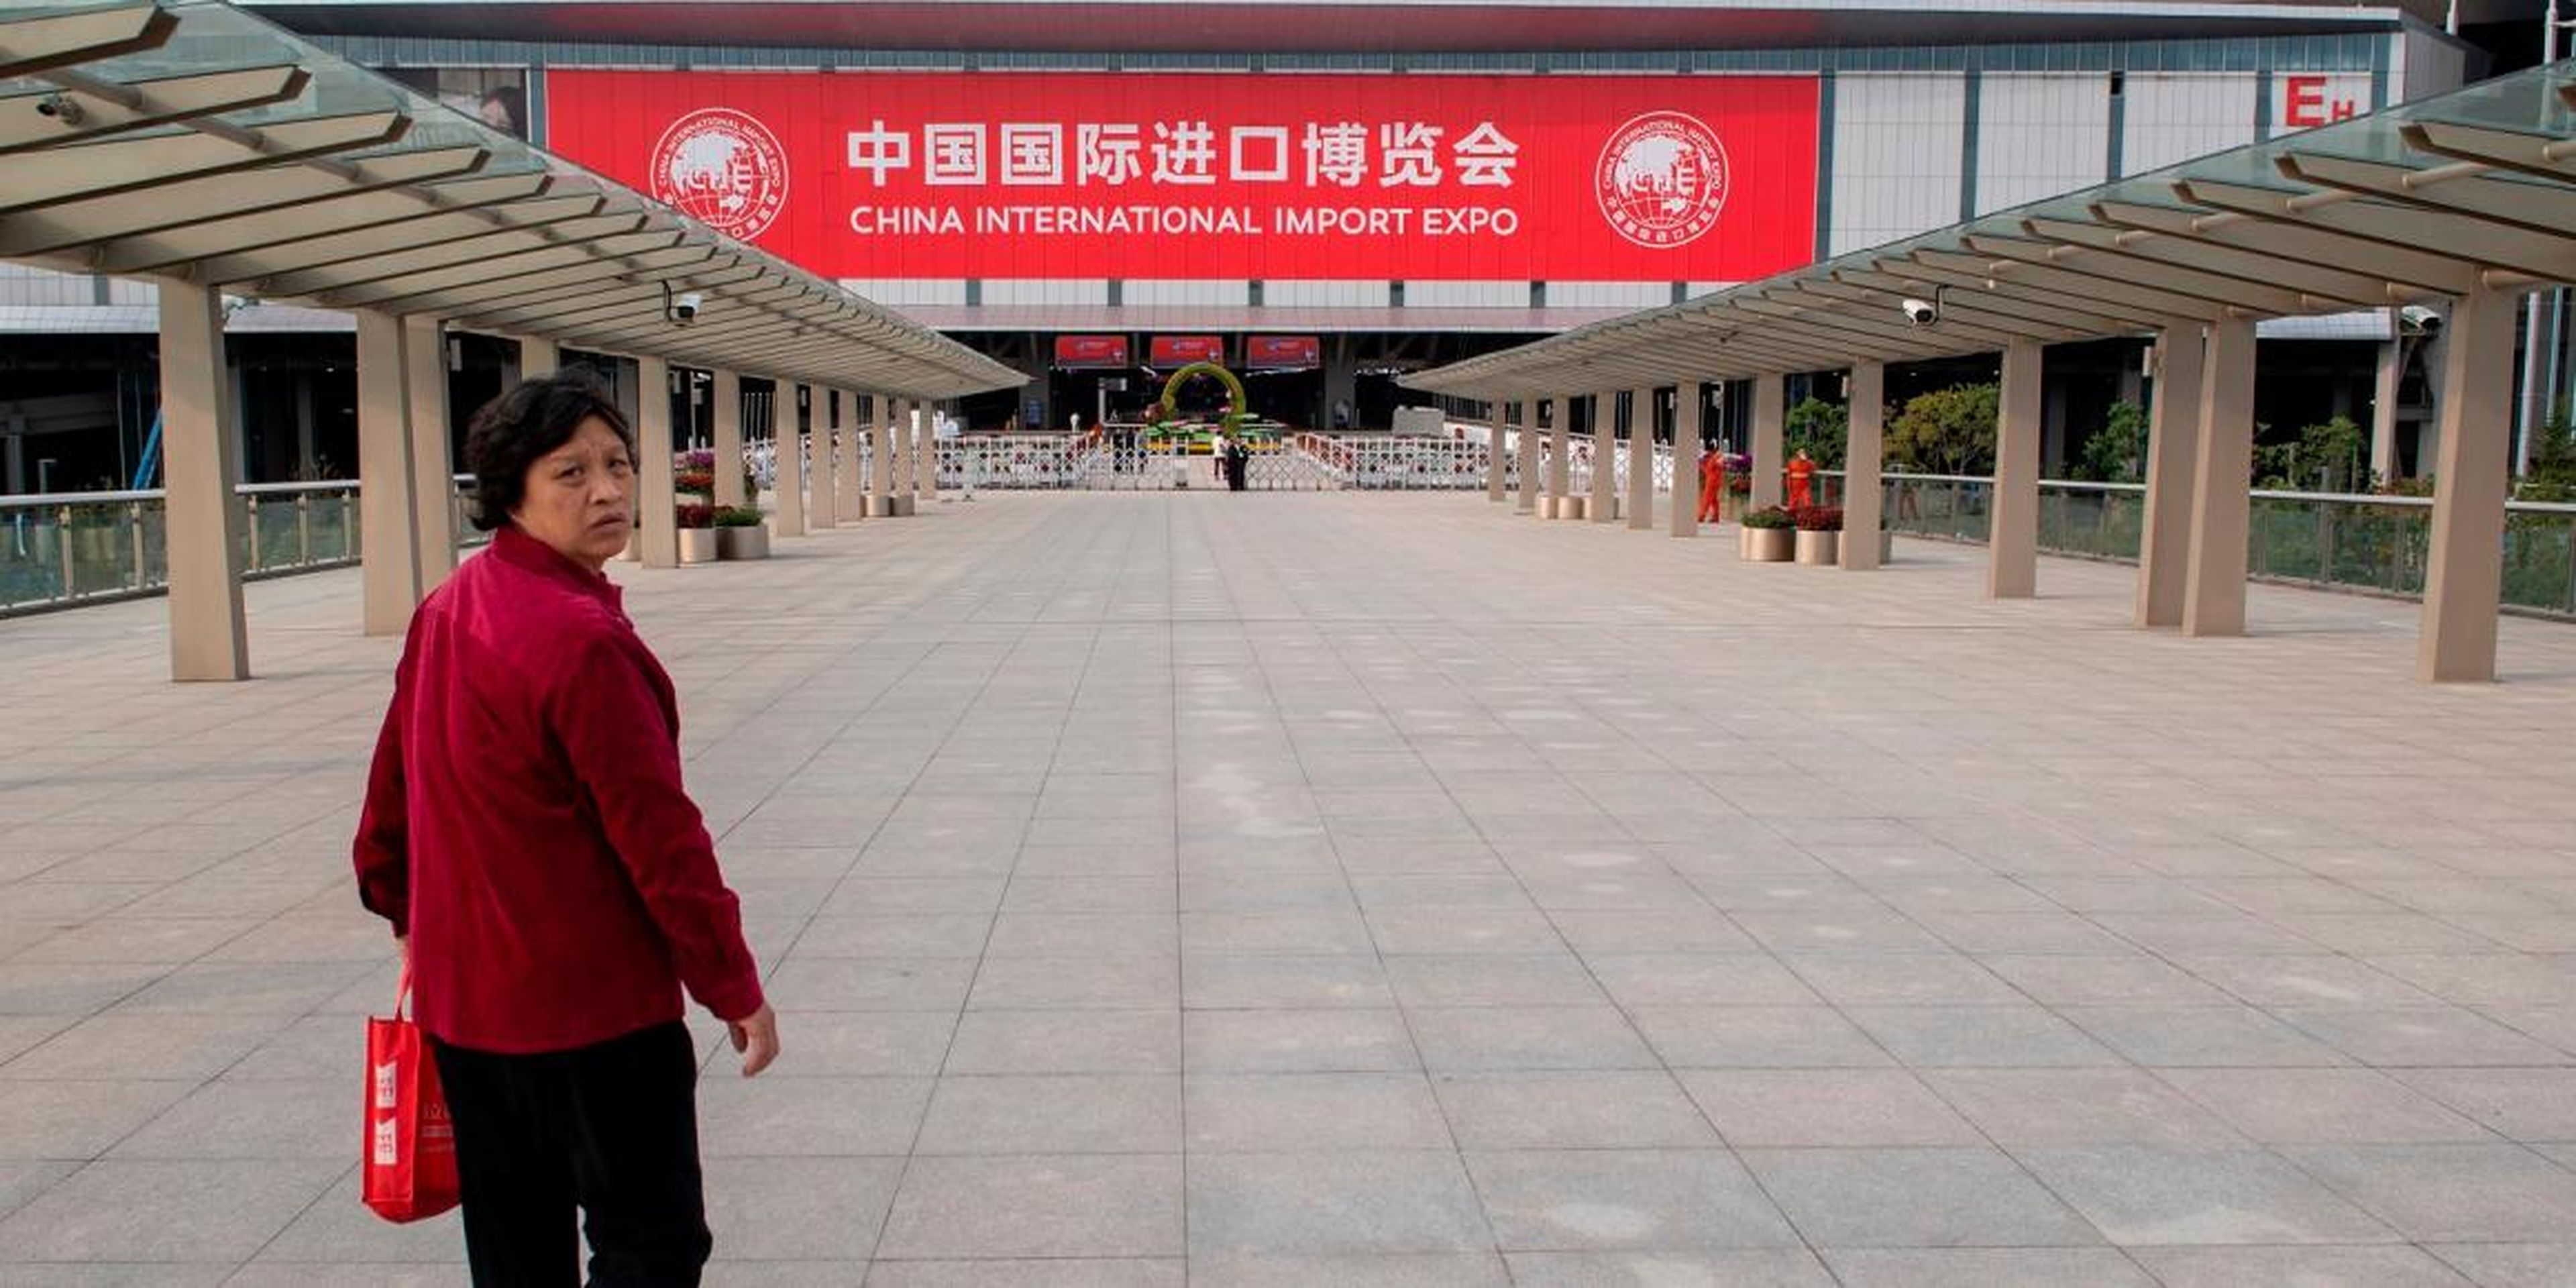 A woman walks towards the entrance of the National Exhibition and Convention Center (Shanghai), the main venue to hold the upcoming first China International Import Expo (CIIE), in Shanghai on October 31, 2018. - As China seeks to counter charges that its